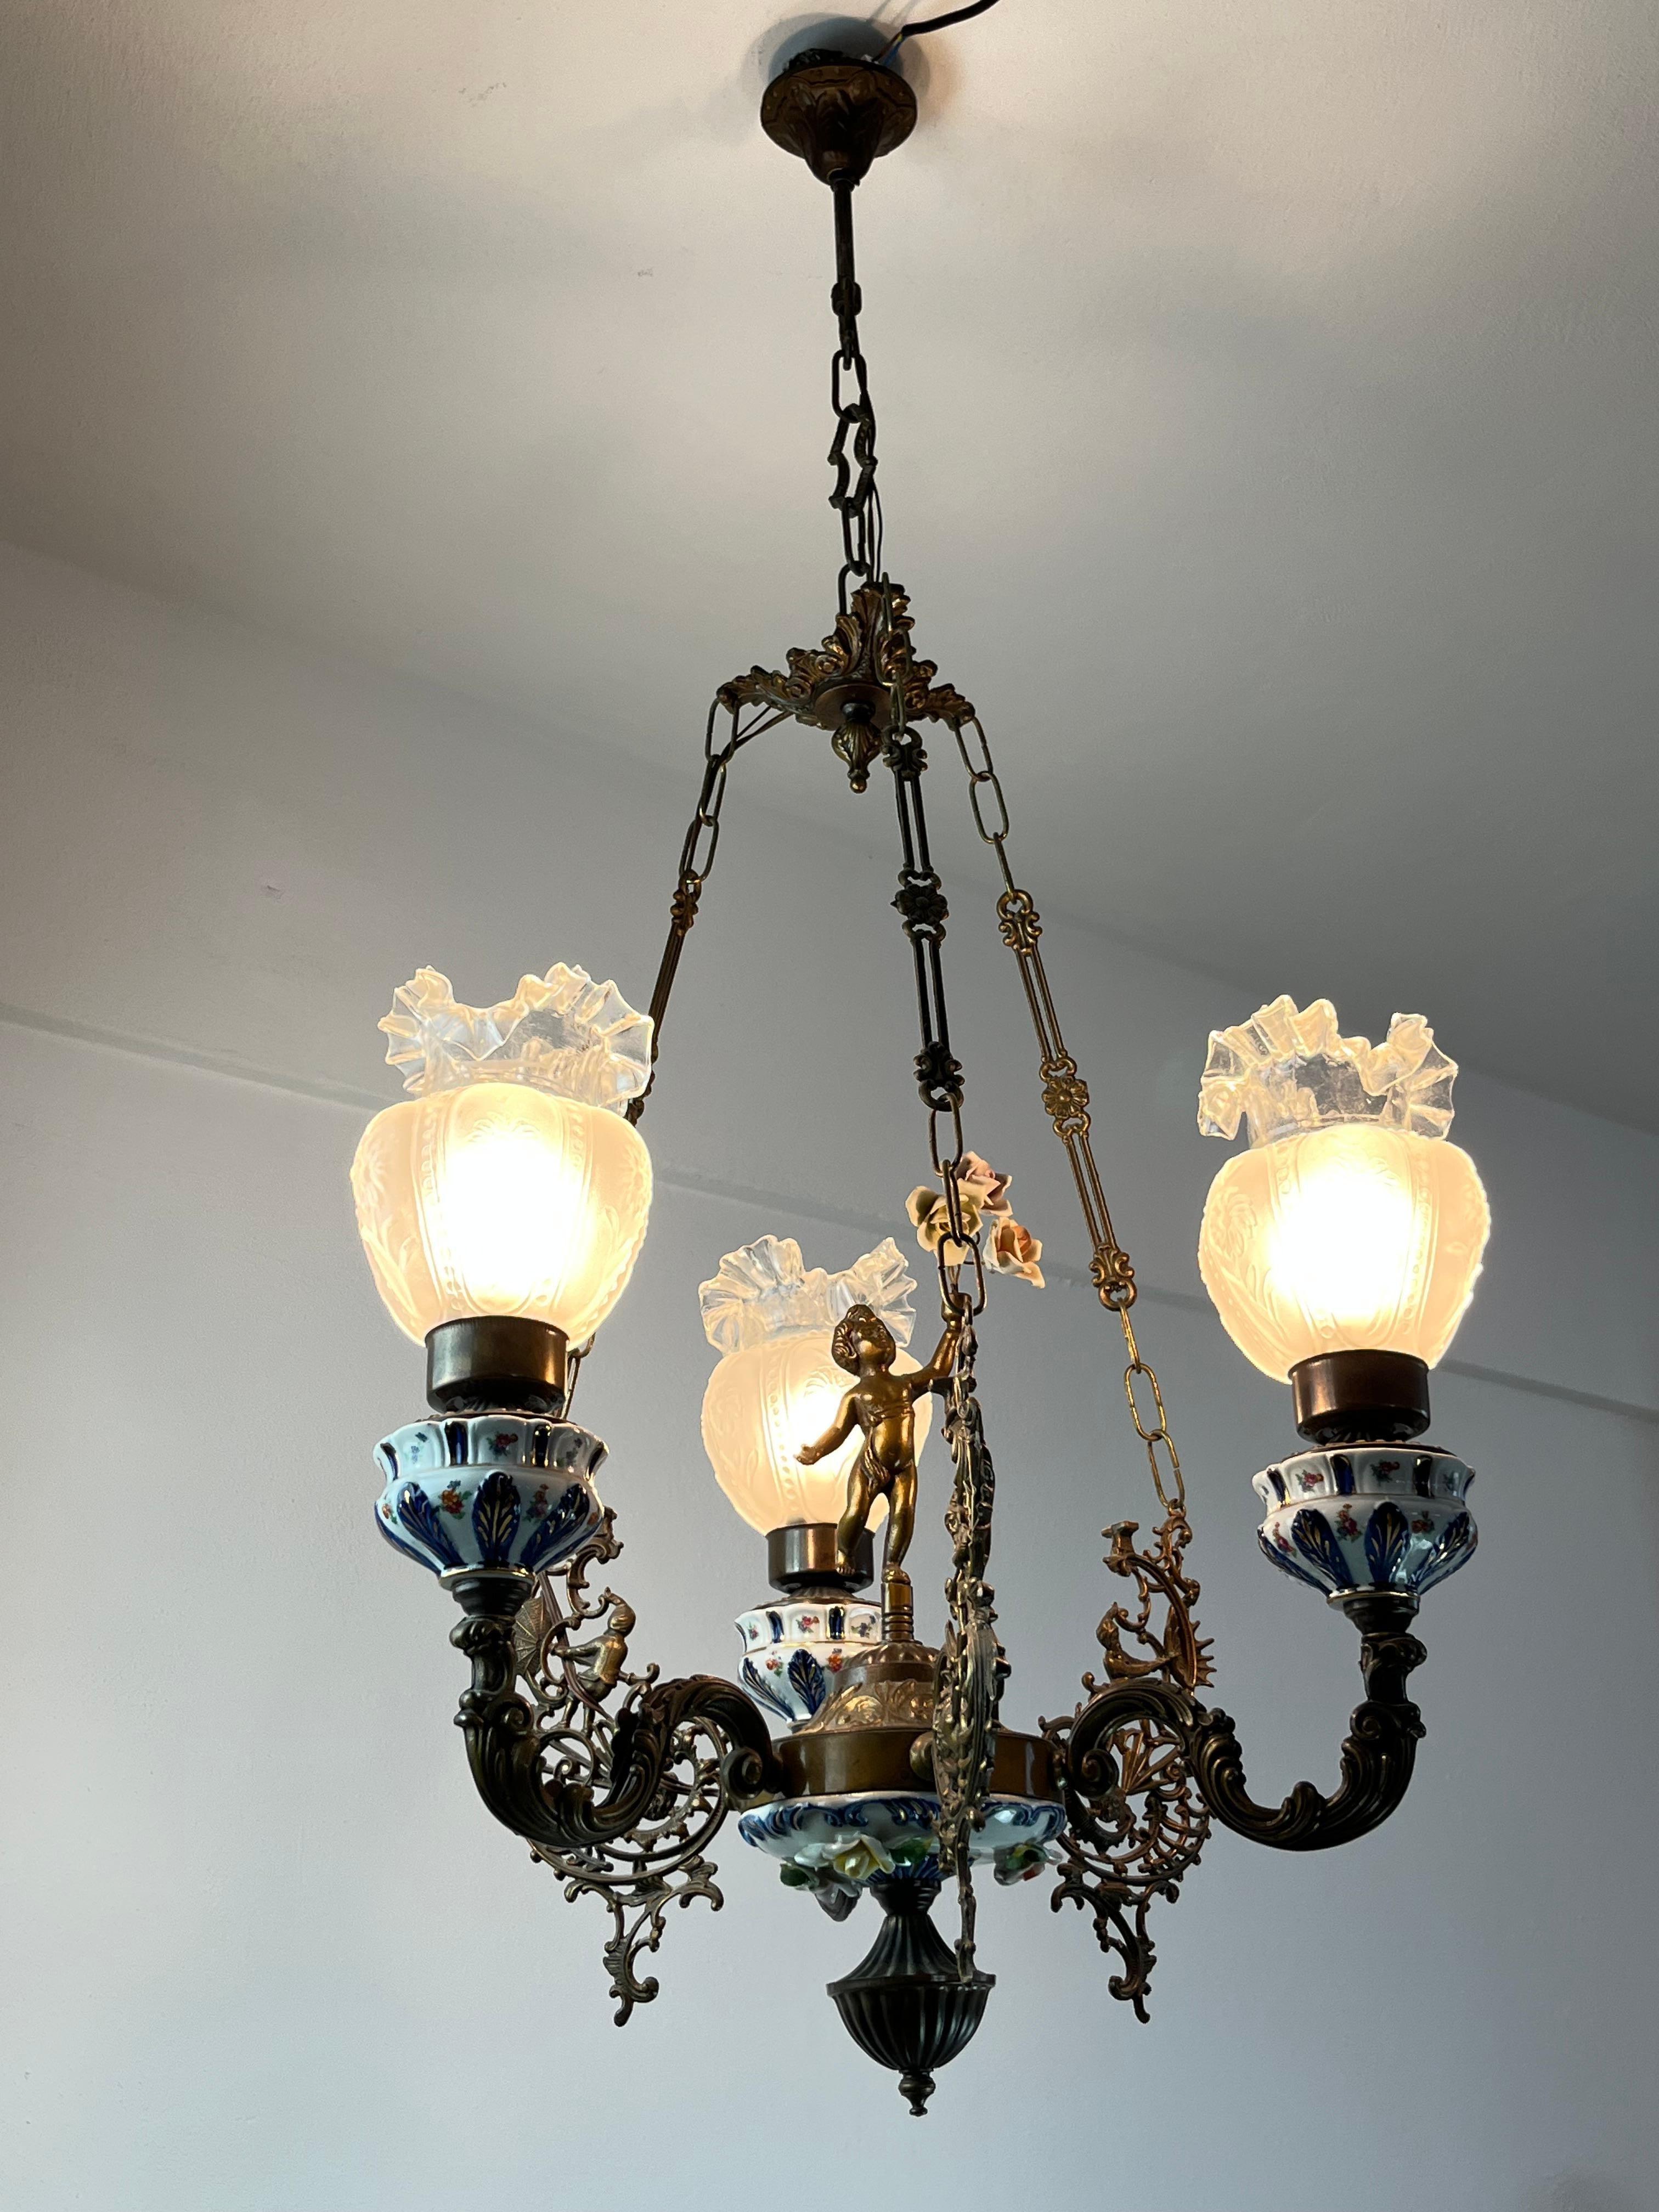 3-light bronze, porcelain and Capodimonte chandelier, Italy, 1940s
Found in a noble apartment.
Three scalloped glass bowls.
It is in excellent condition considering it is almost 100 years old. E14 lamp connection.